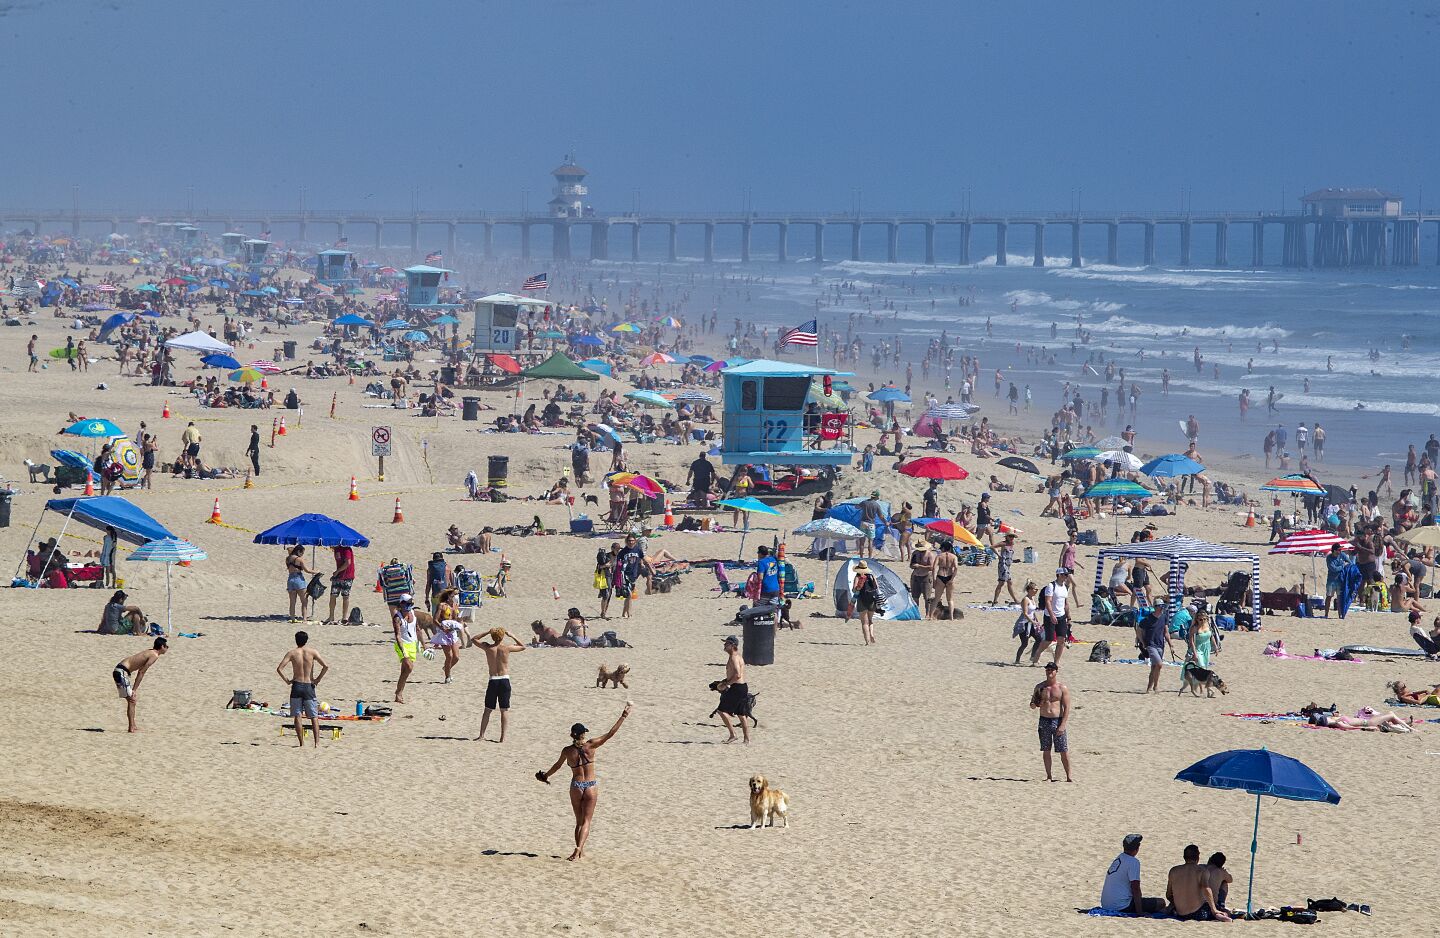 HUNTINGTON BEACH, CA -- SATURDAY, APRIL 25, 2020: Thousands of beach-goers enjoy a warm, sunny day at the beach amid state-mandated stay-at-home and social distancing mandate to stave off the coronavirus pandemic in Huntington Beach, CA, on April 25, 2020. (Allen J. Schaben / Los Angeles Times)